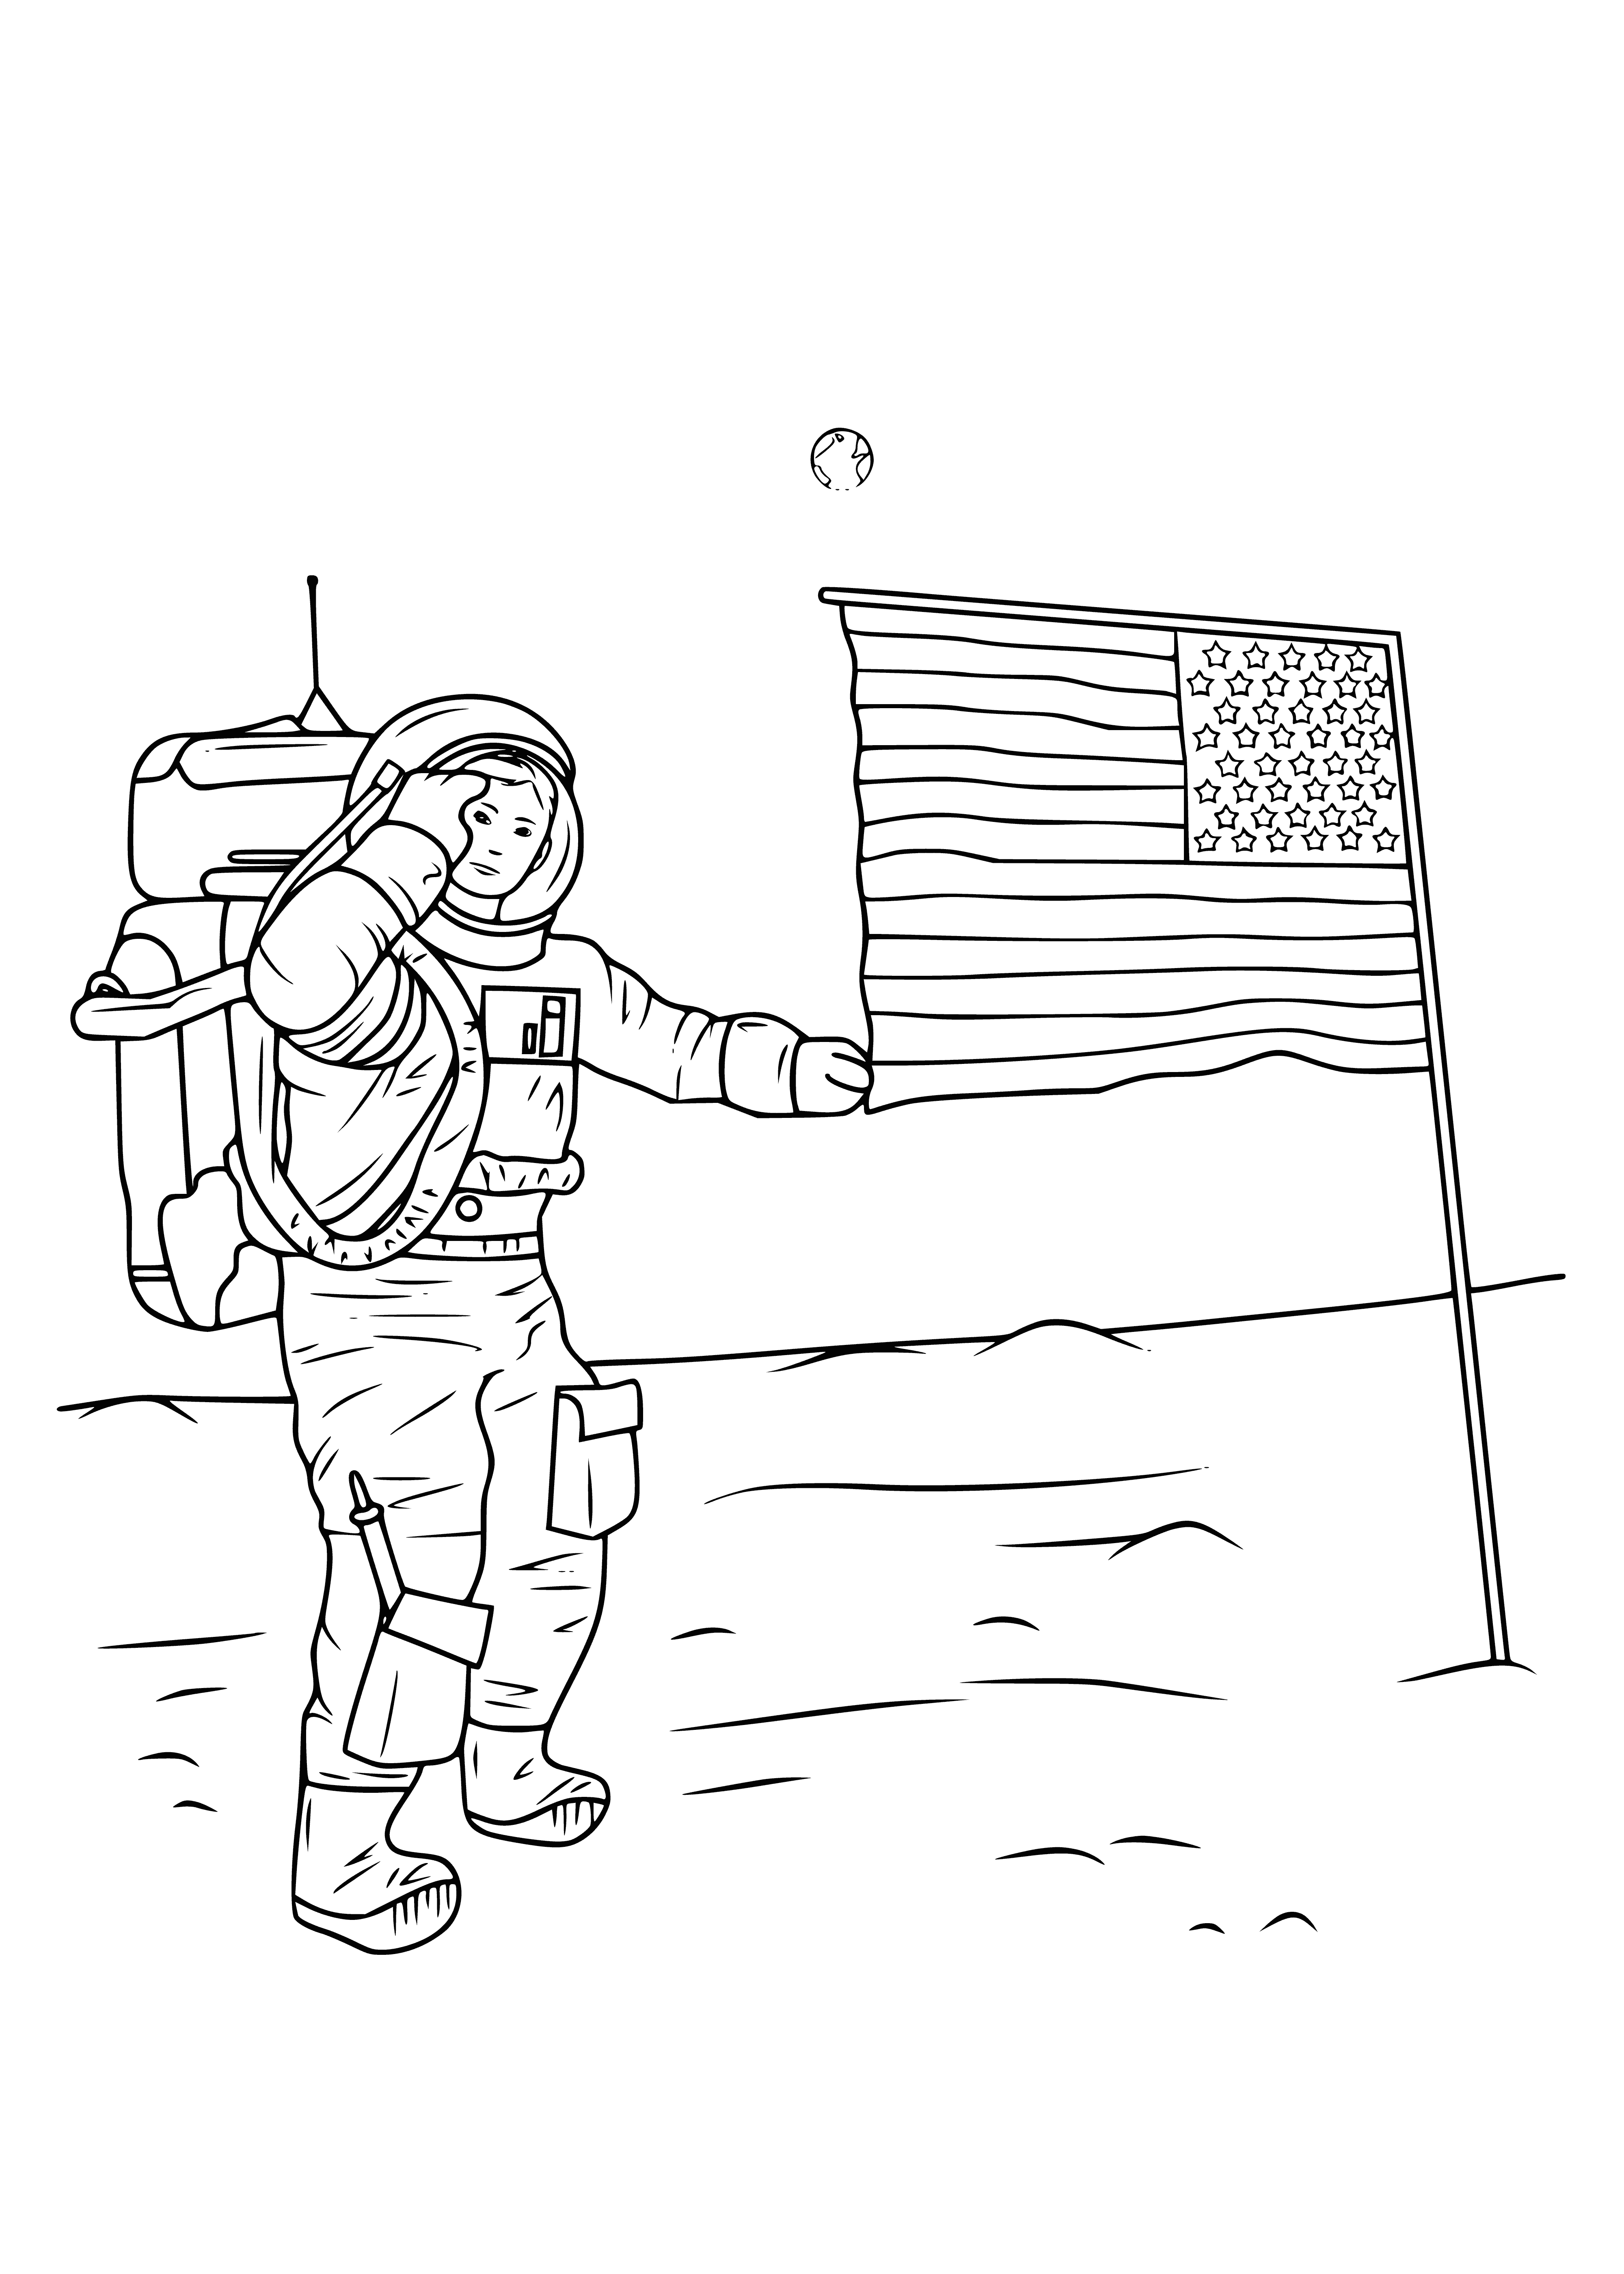 First man on the moon coloring page